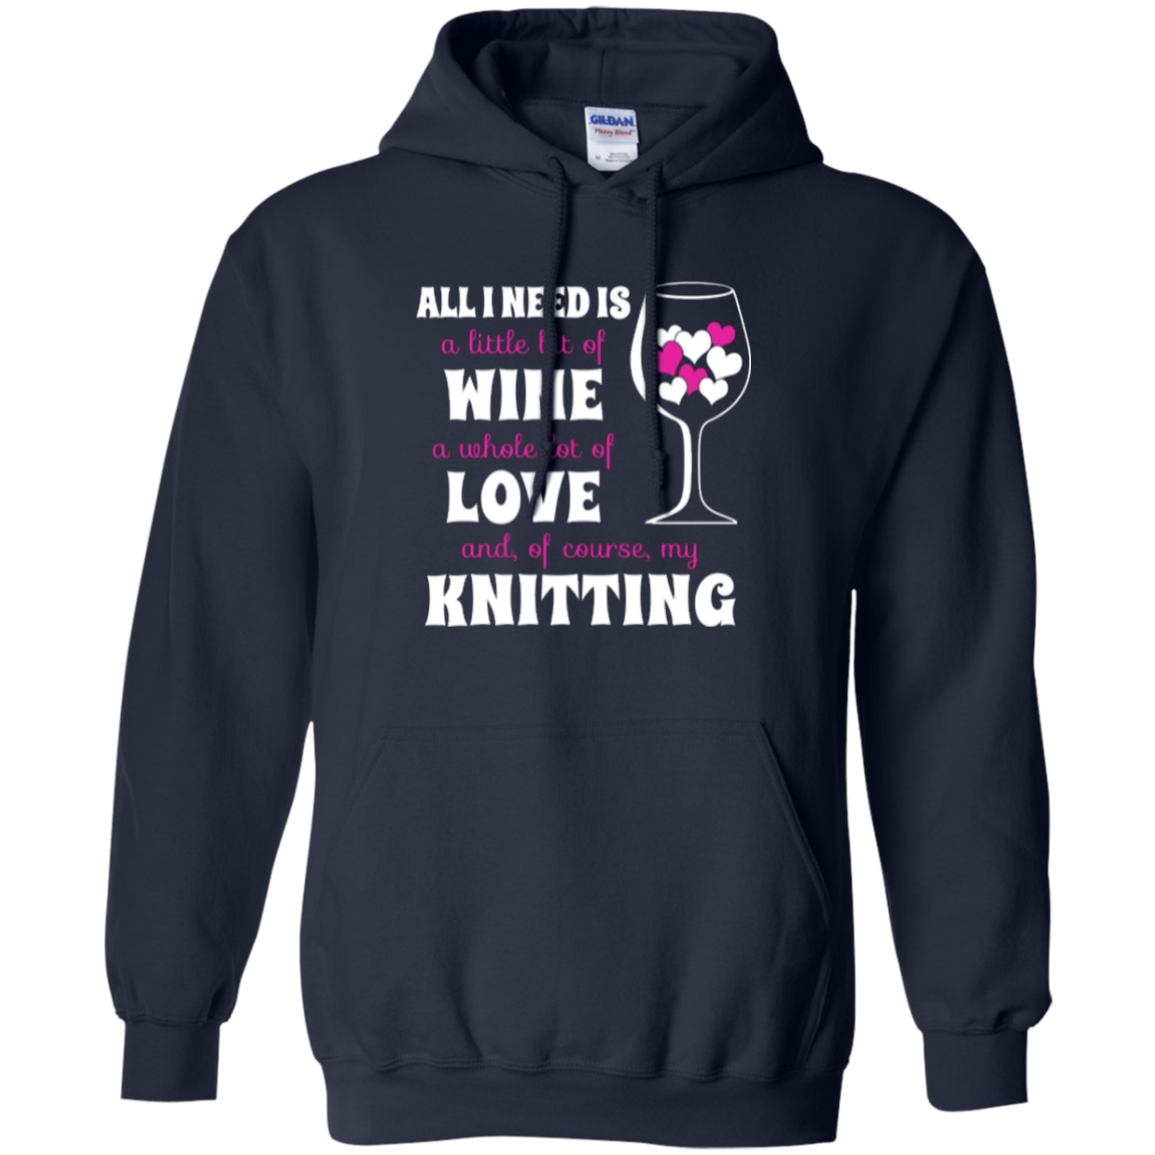 All I Need is Wine-Love-Knitting Pullover Hoodies - Crafter4Life - 3